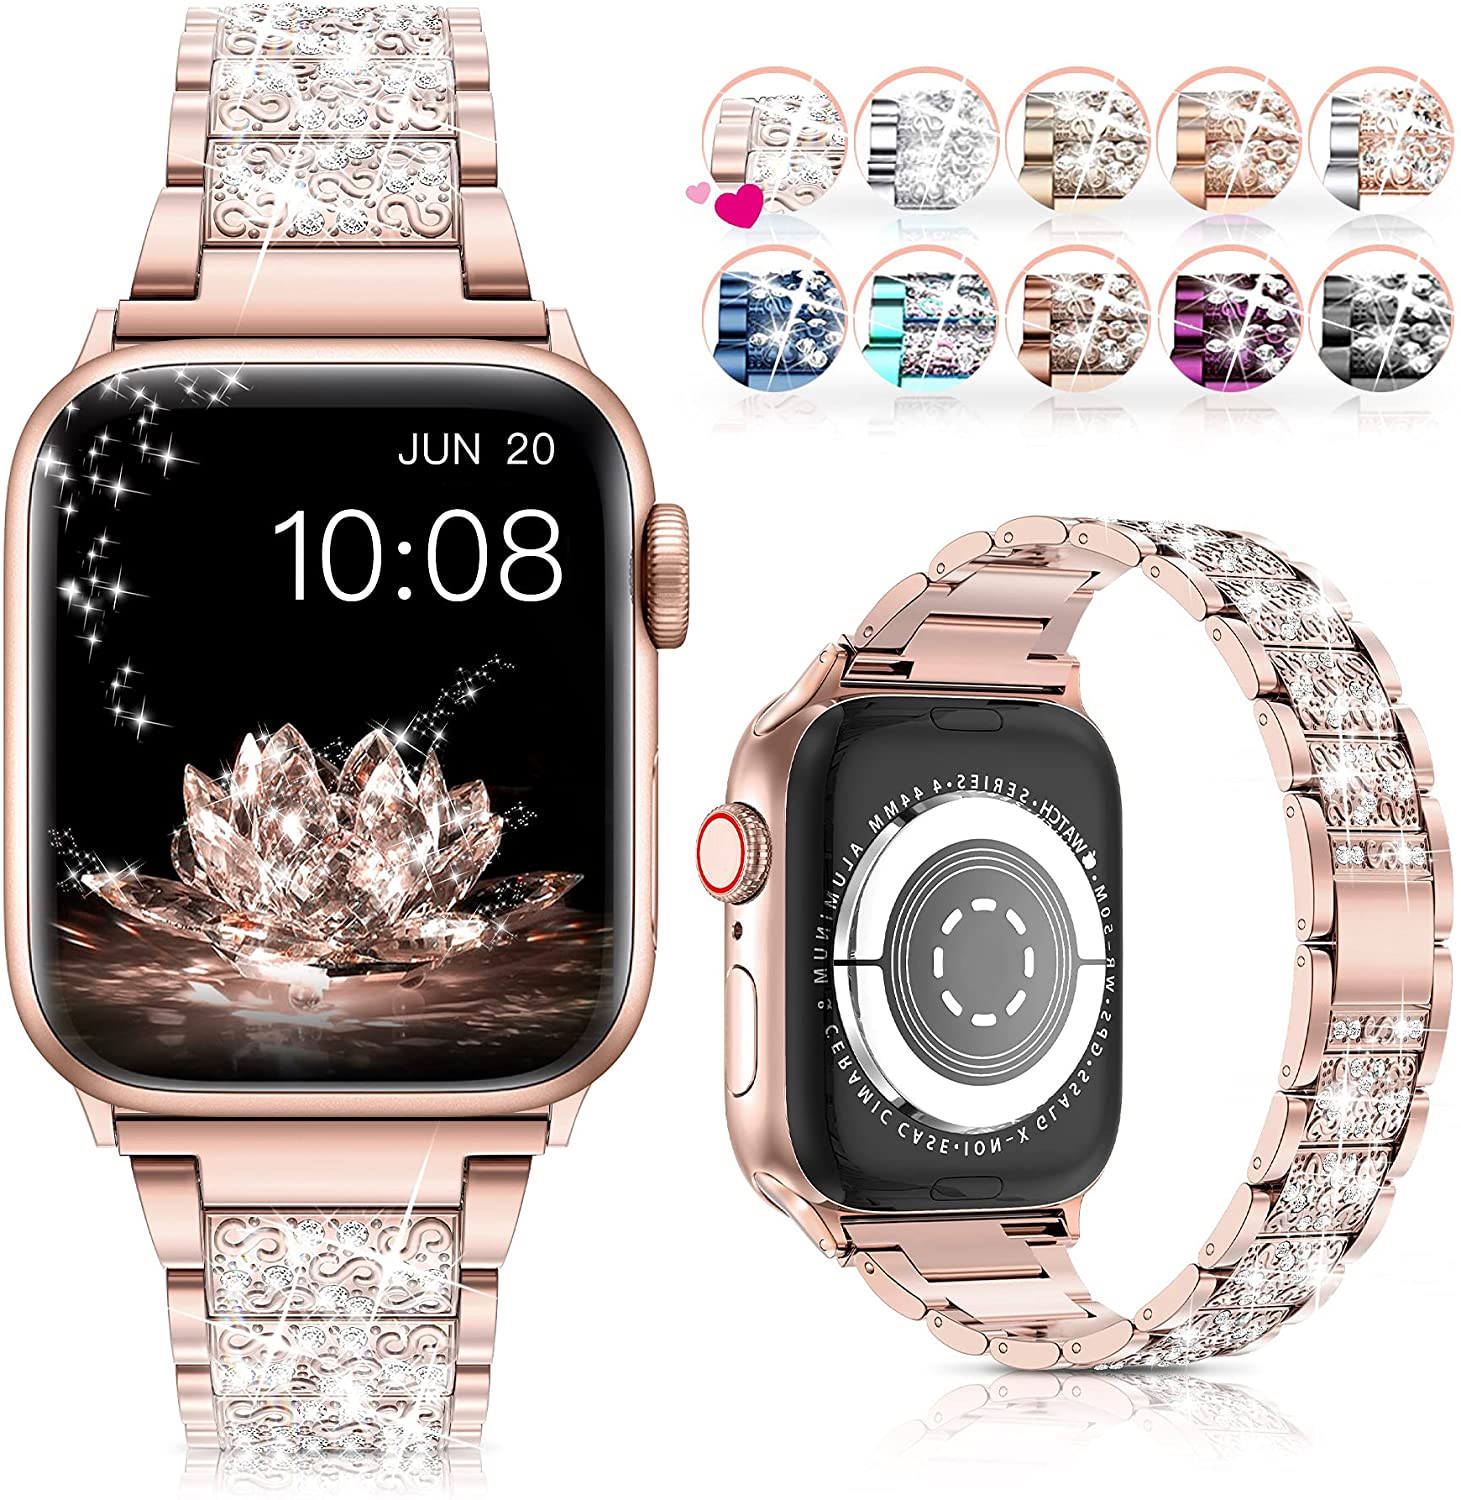 Detail Iwatch Images Nomer 32